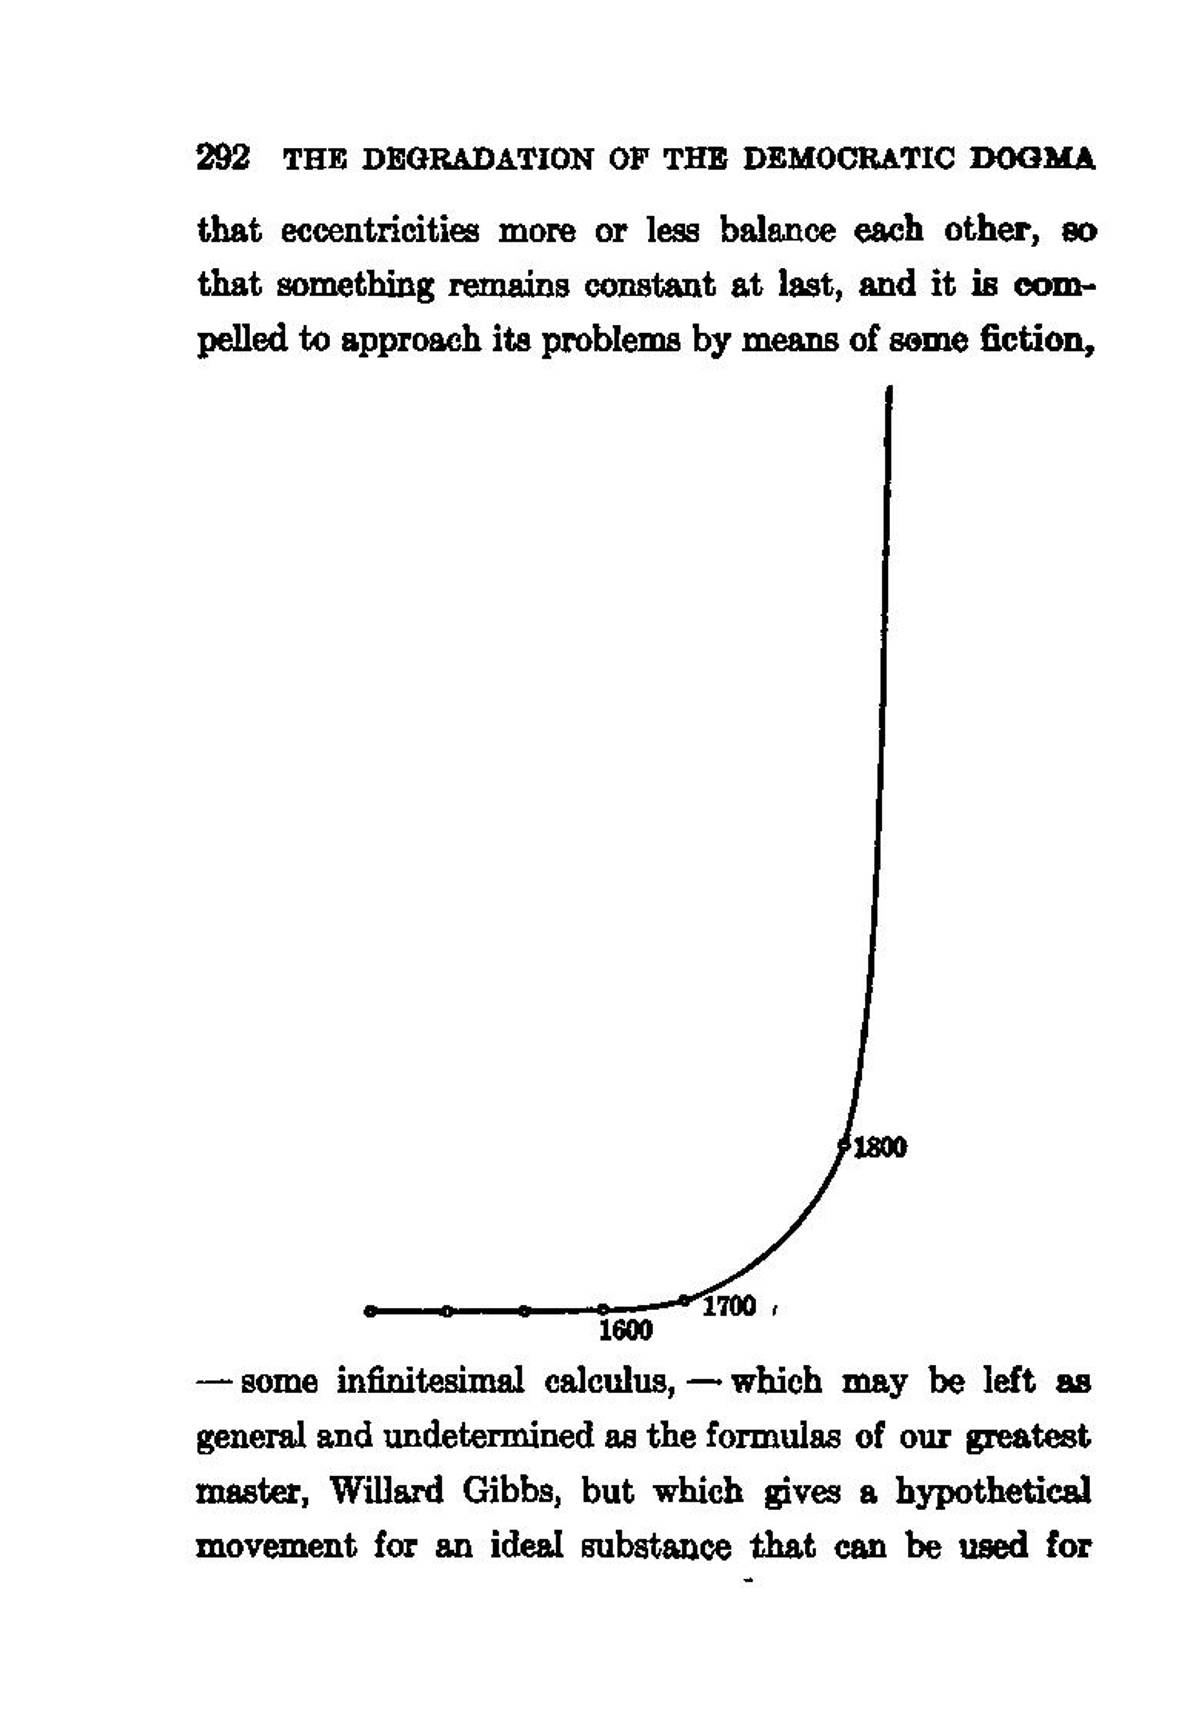 The ‘Adams curve.’ From ‘The Degradation of the Democratic Dogma’ by Henry Adams (Macmillan, 1919)